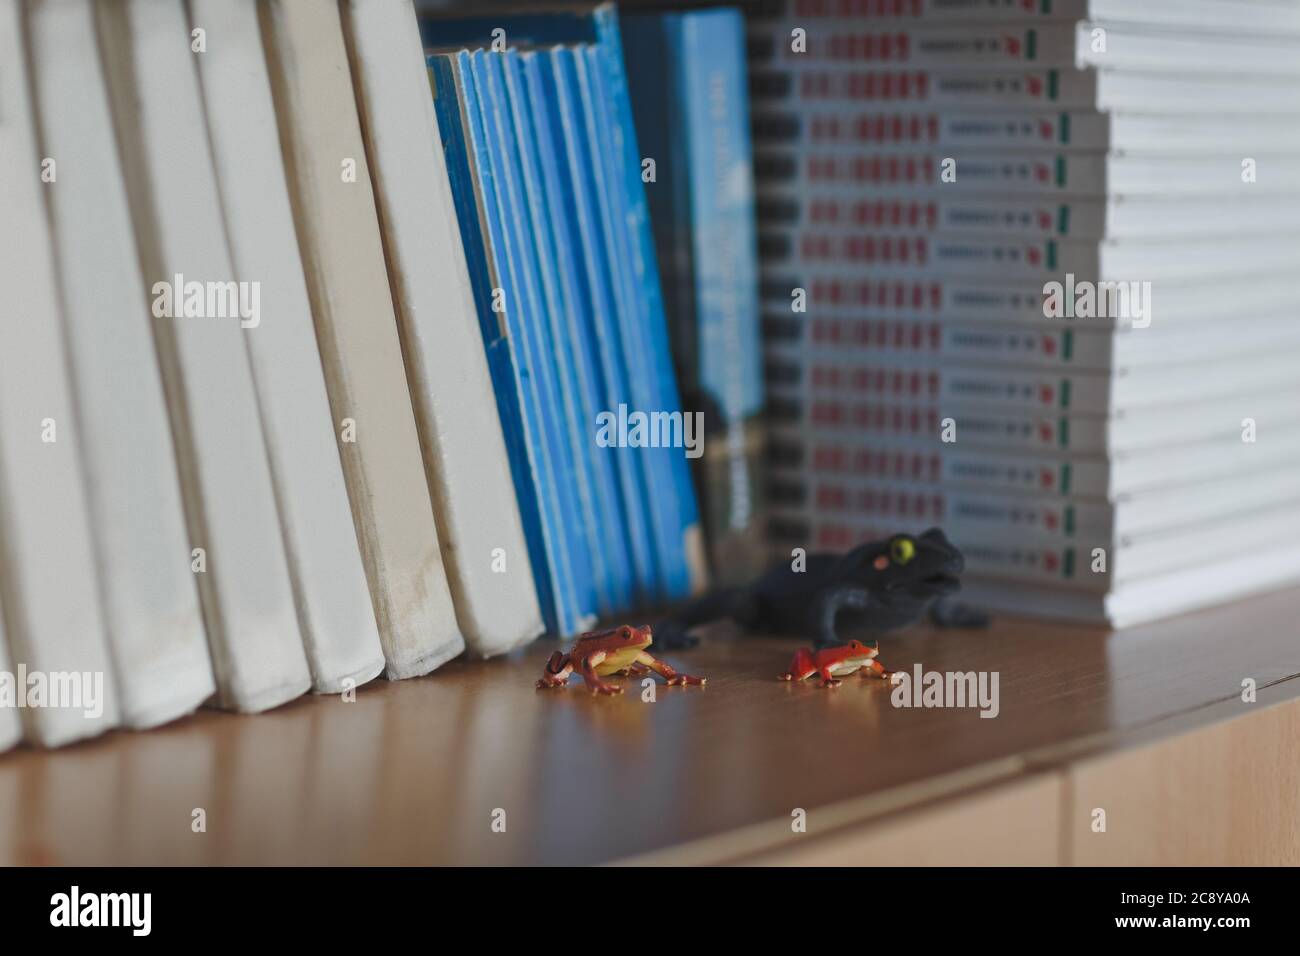 On the wooden shelf in the classroom are textbooks and three figures of different frogs. Stock Photo